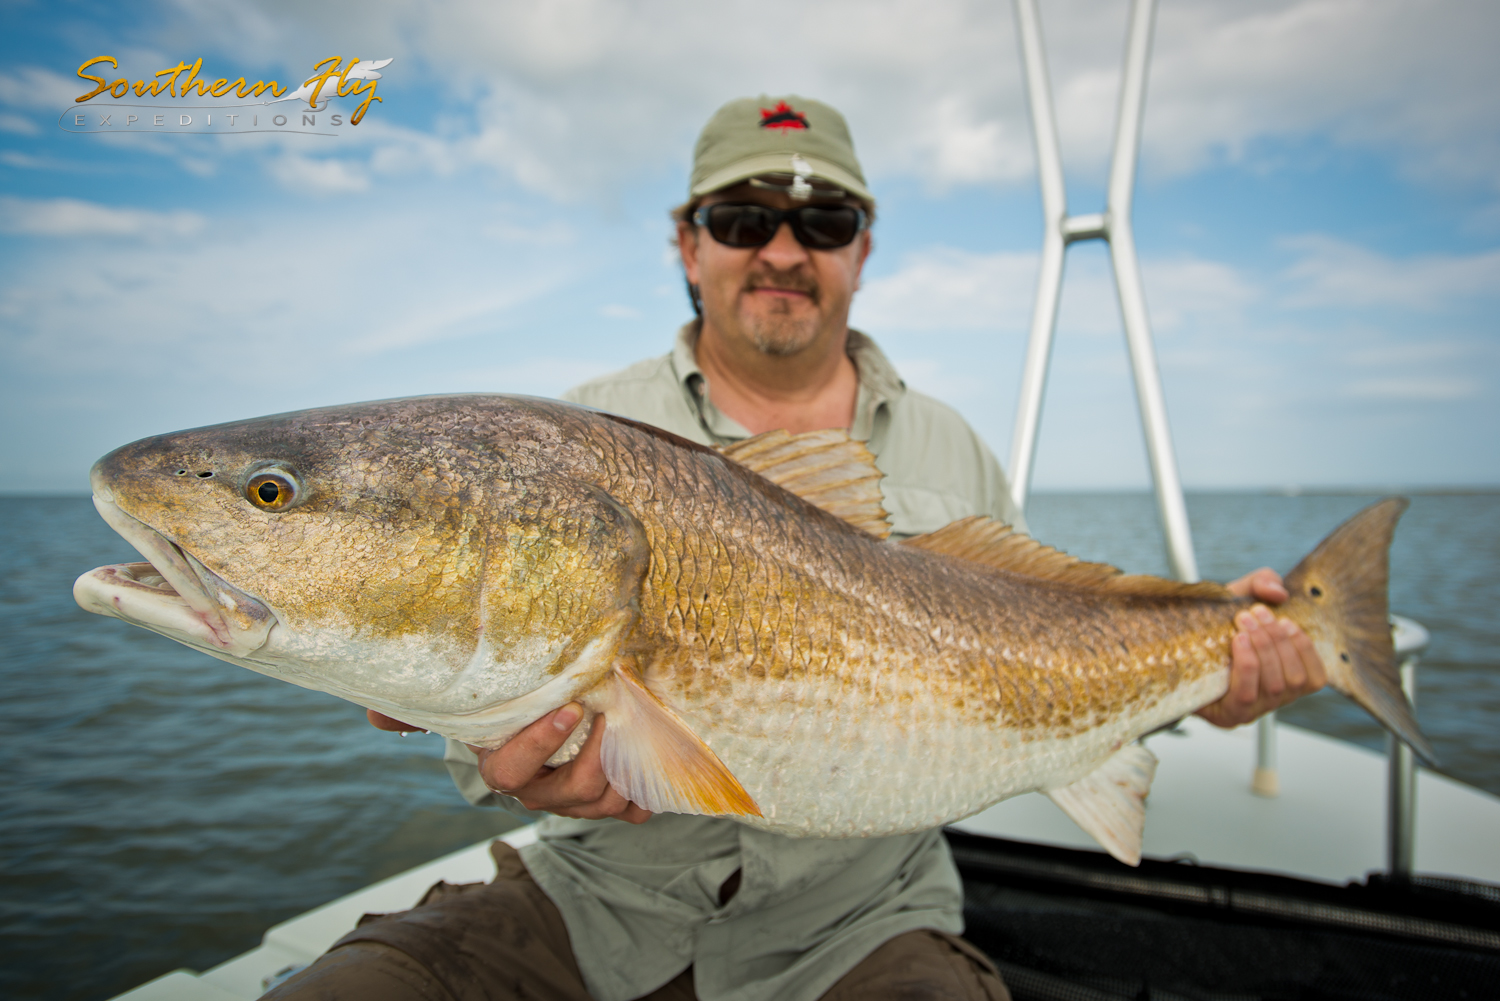 2015-12-16-17-Southern-Fly-Expeditions-BrettBruner-2.jpg